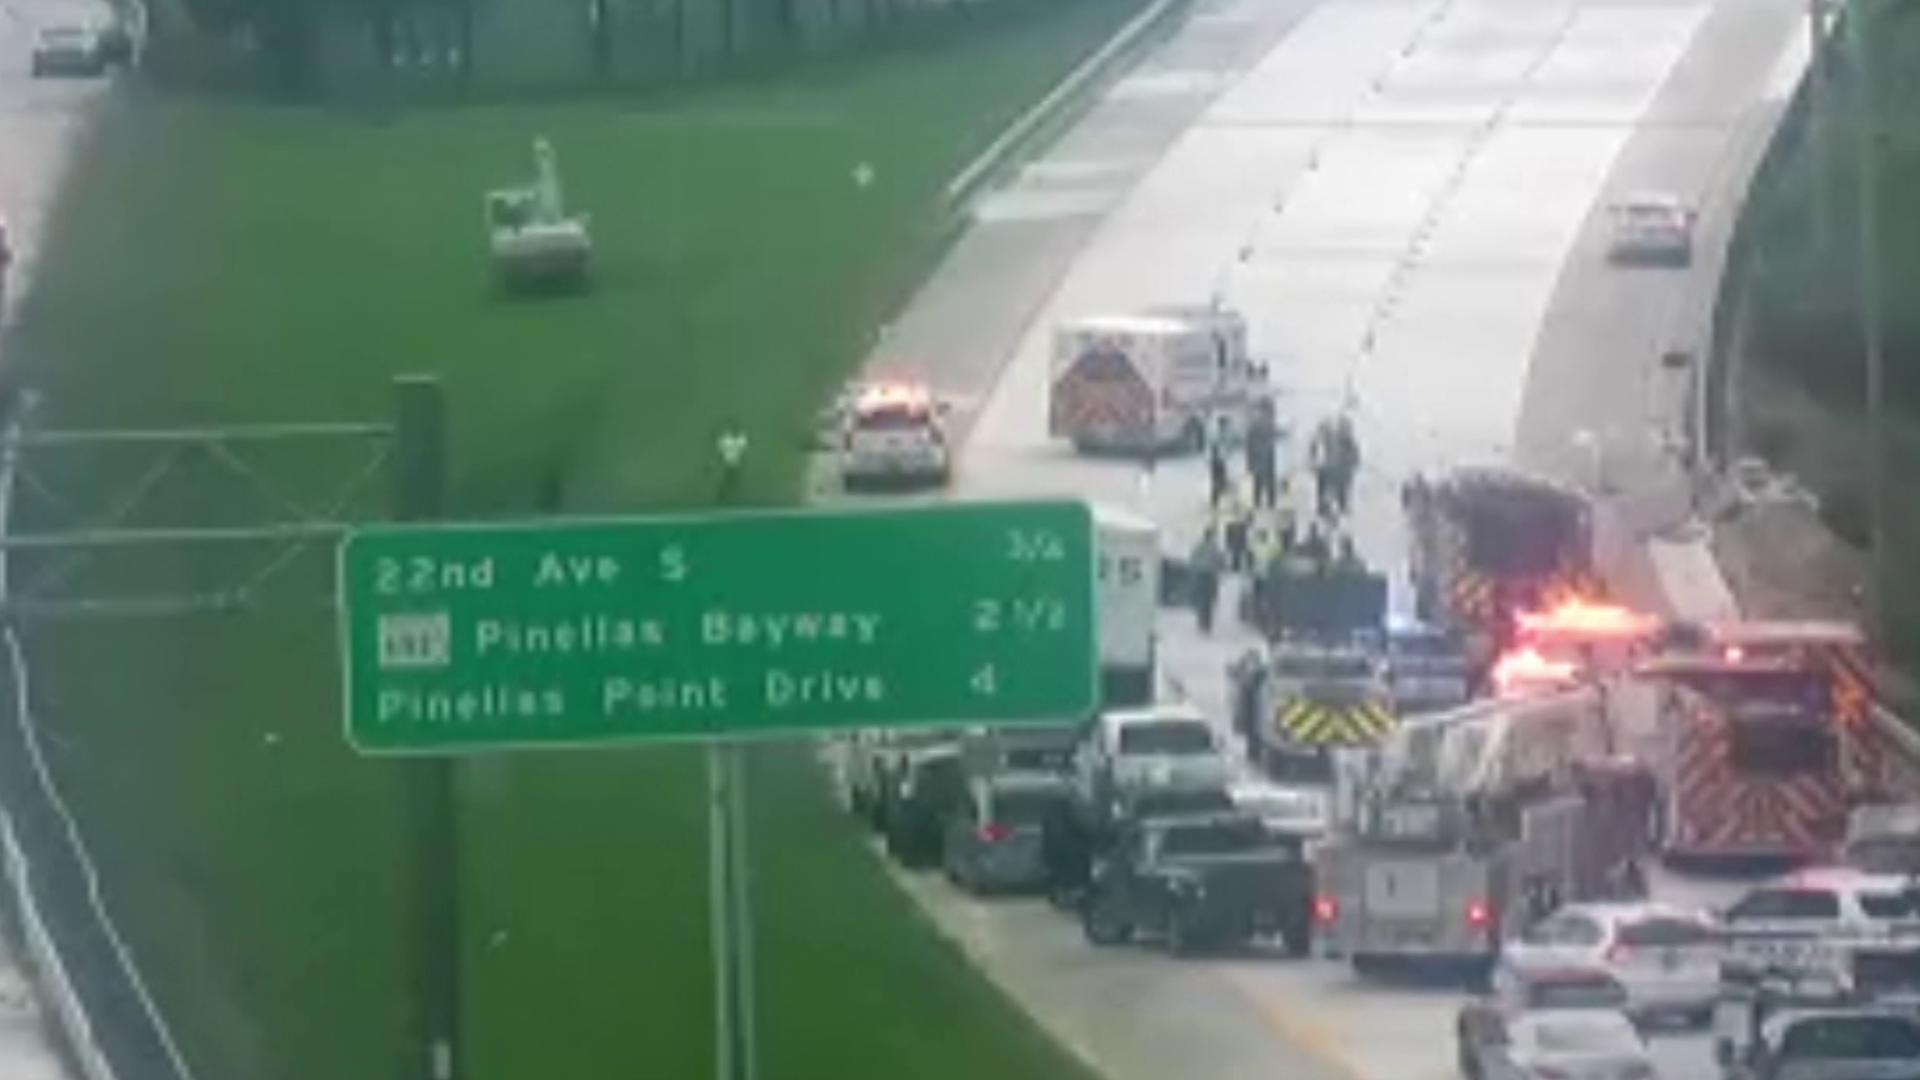 Law enforcement and rescuers are responding to a multi-car crash on southbound I-275 near 22nd Avenue South.